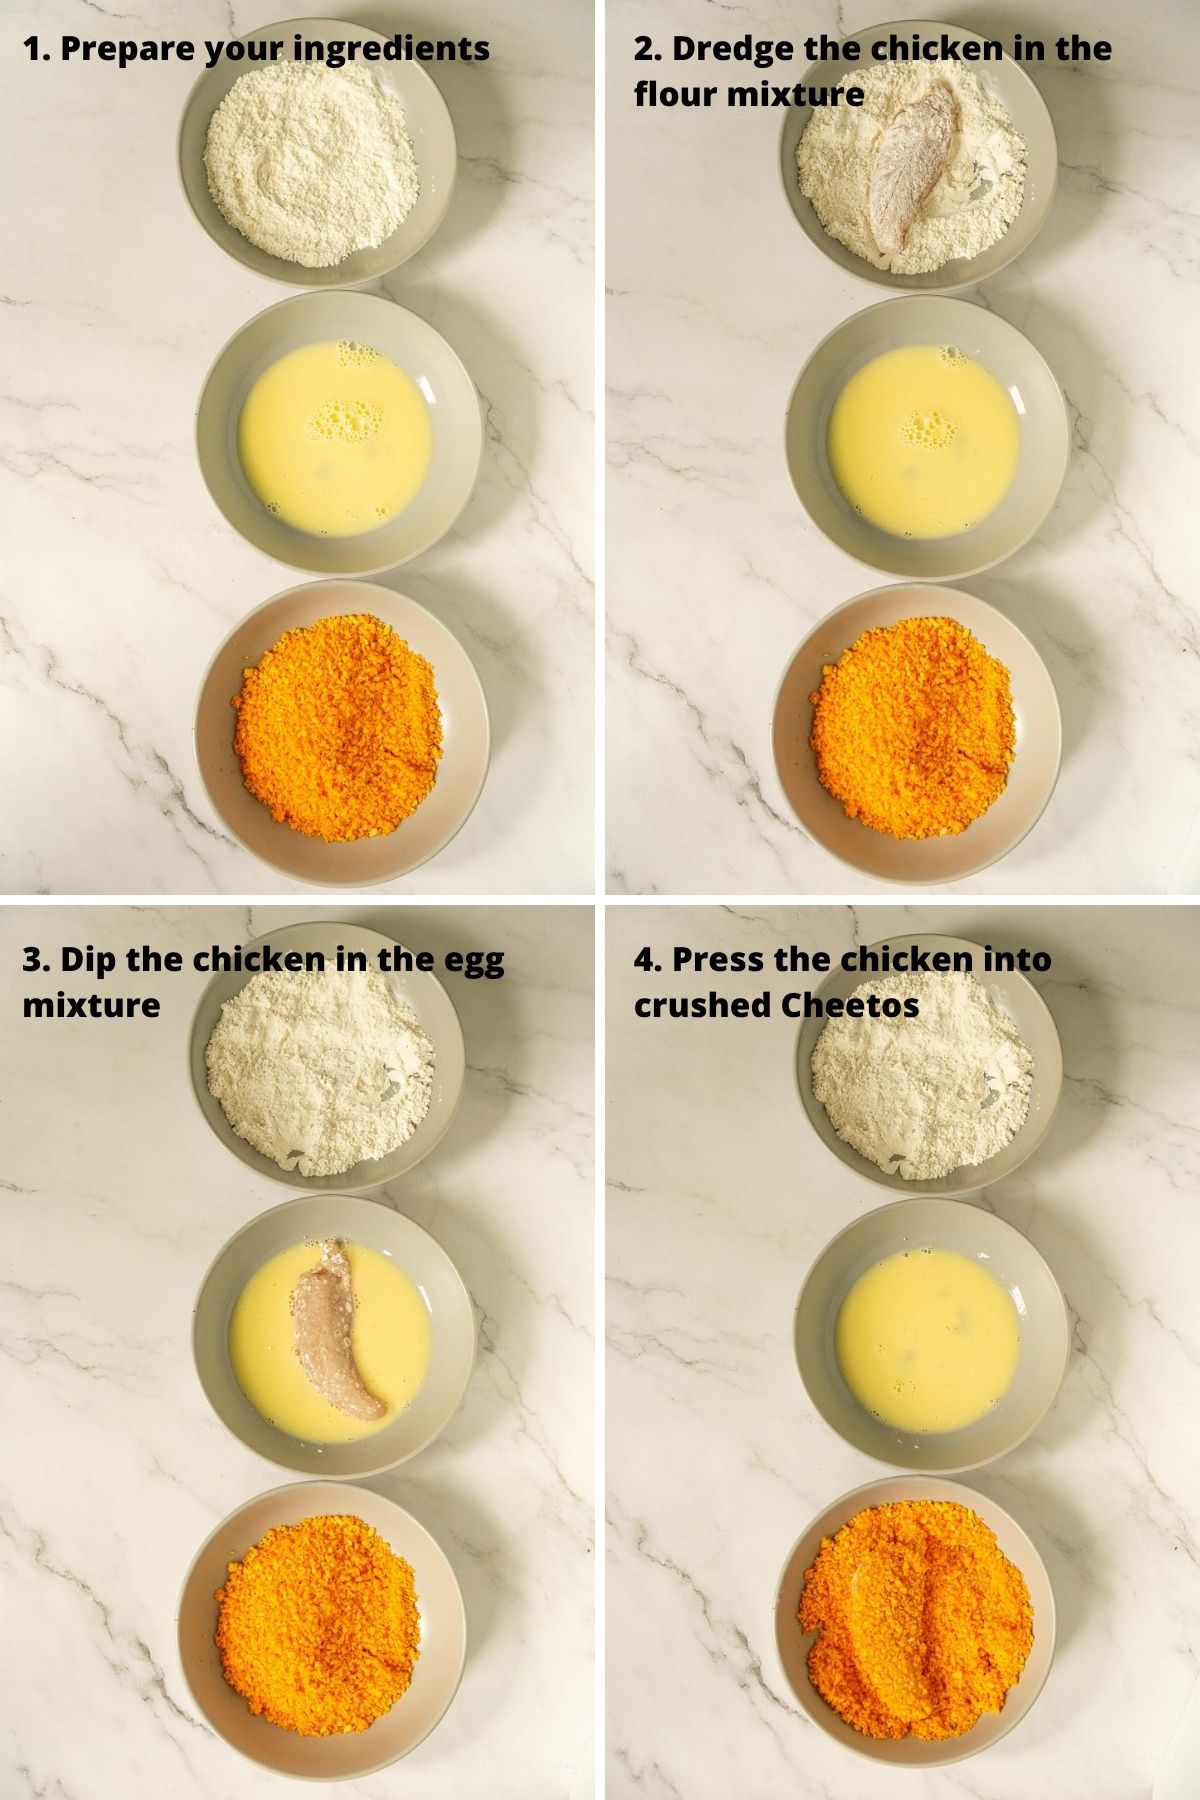 4 pictures showing how to coat chicken nuggets in cheetos